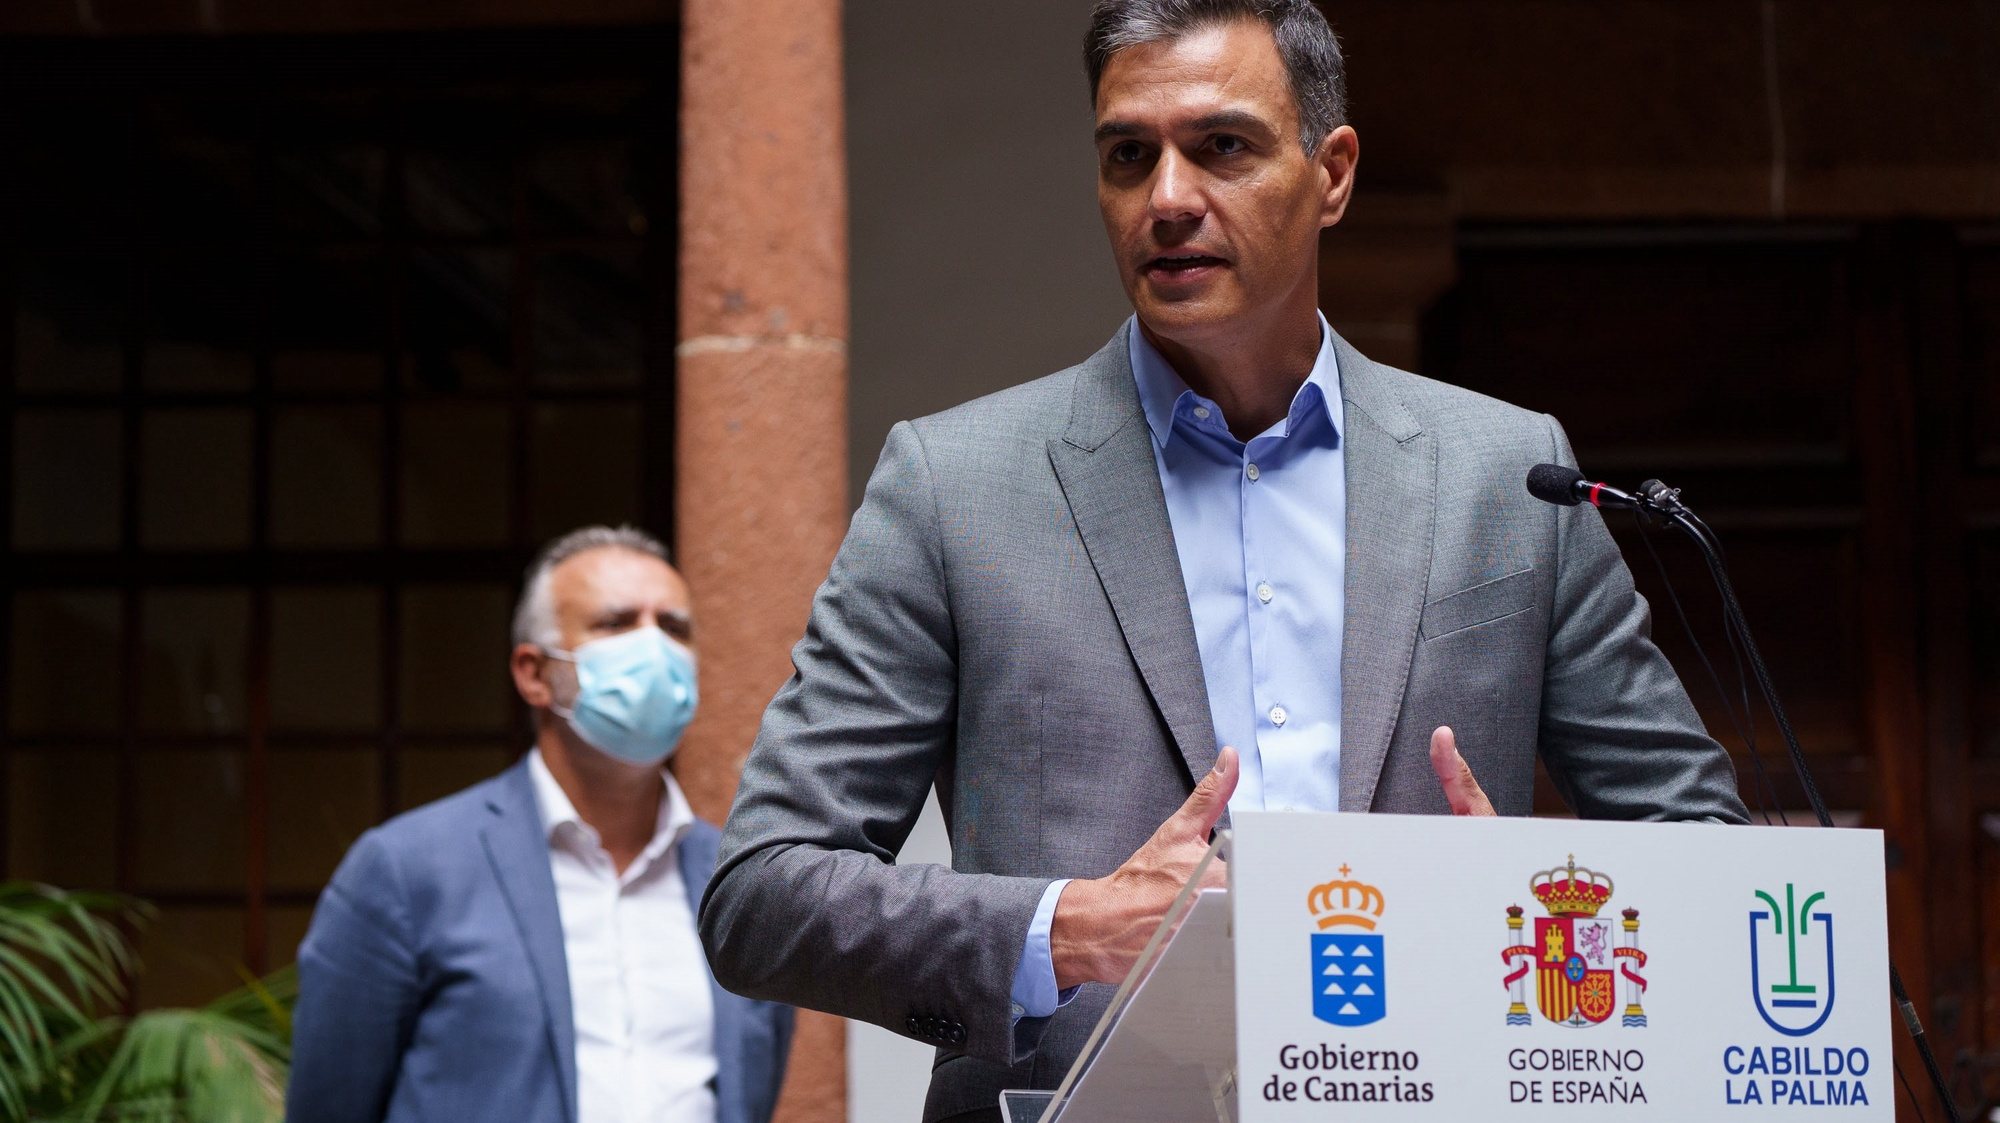 epa09485385 Spanish Prime minister Pedro Sanchez (R) and Canary Islands regional president Angel Victor Torres (L) during the press conference after their work meeting held at Santa Cruz de La Palma, Canary Islands, Spain on 24 September 2021 to evaluate the damages caused by the Cumbre Vieja volcano. The volcano began to erupt in Rajada Mountain in the municipality of El Paso on 19 September. The area had registered hundreds of small earthquakes along the week as magma pressed the subsoil on its way out, urging the regional authorities to evacuate locals before the eruption took place.  EPA/Ramon de la Rocha